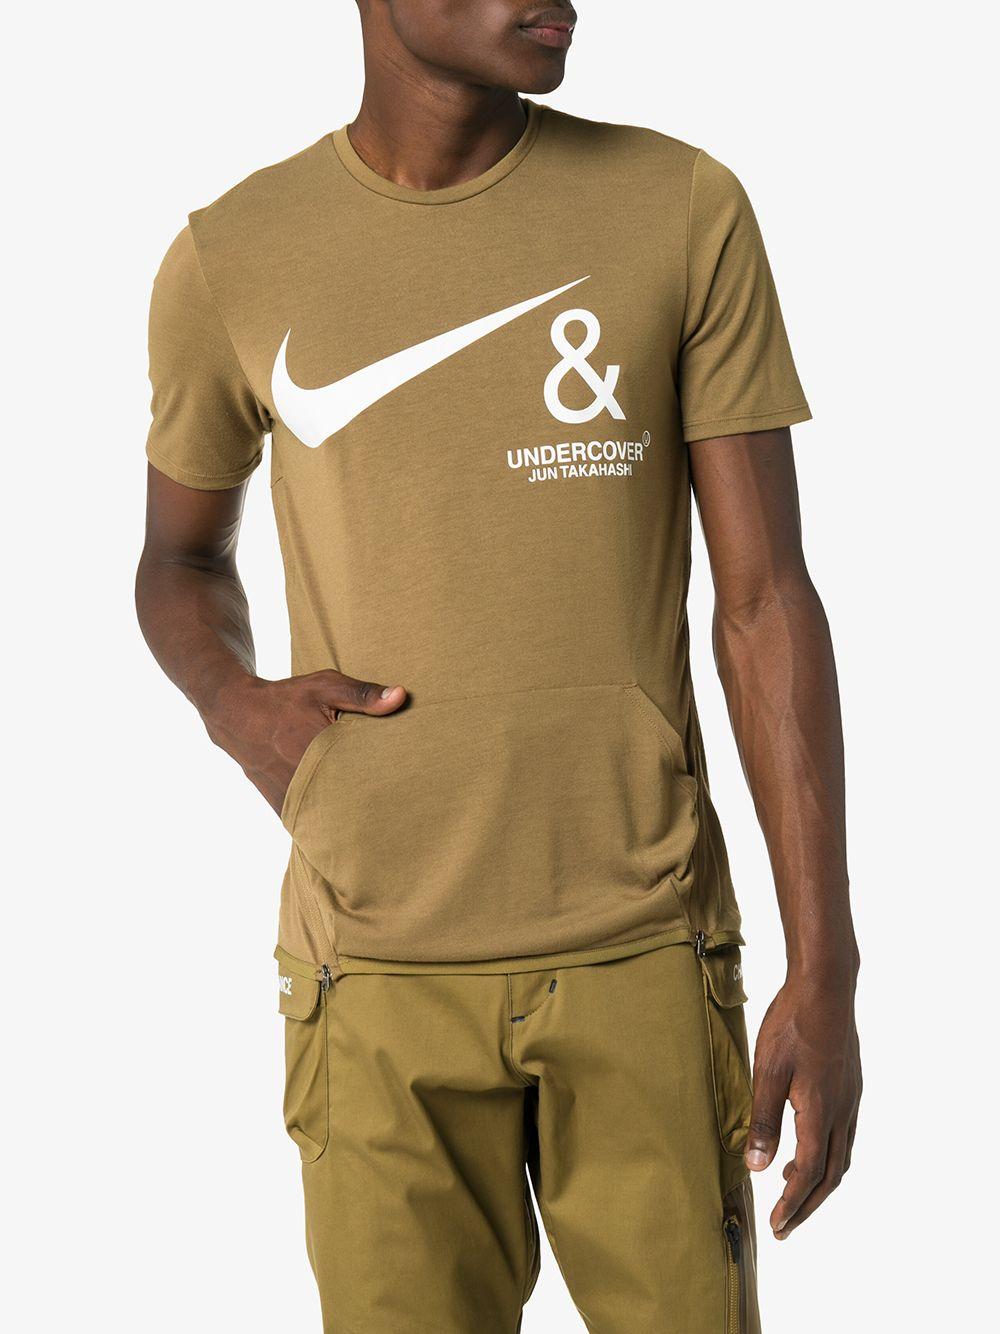 Nike Synthetic Undercover X Pocket T-shirt in Brown for Men | Lyst